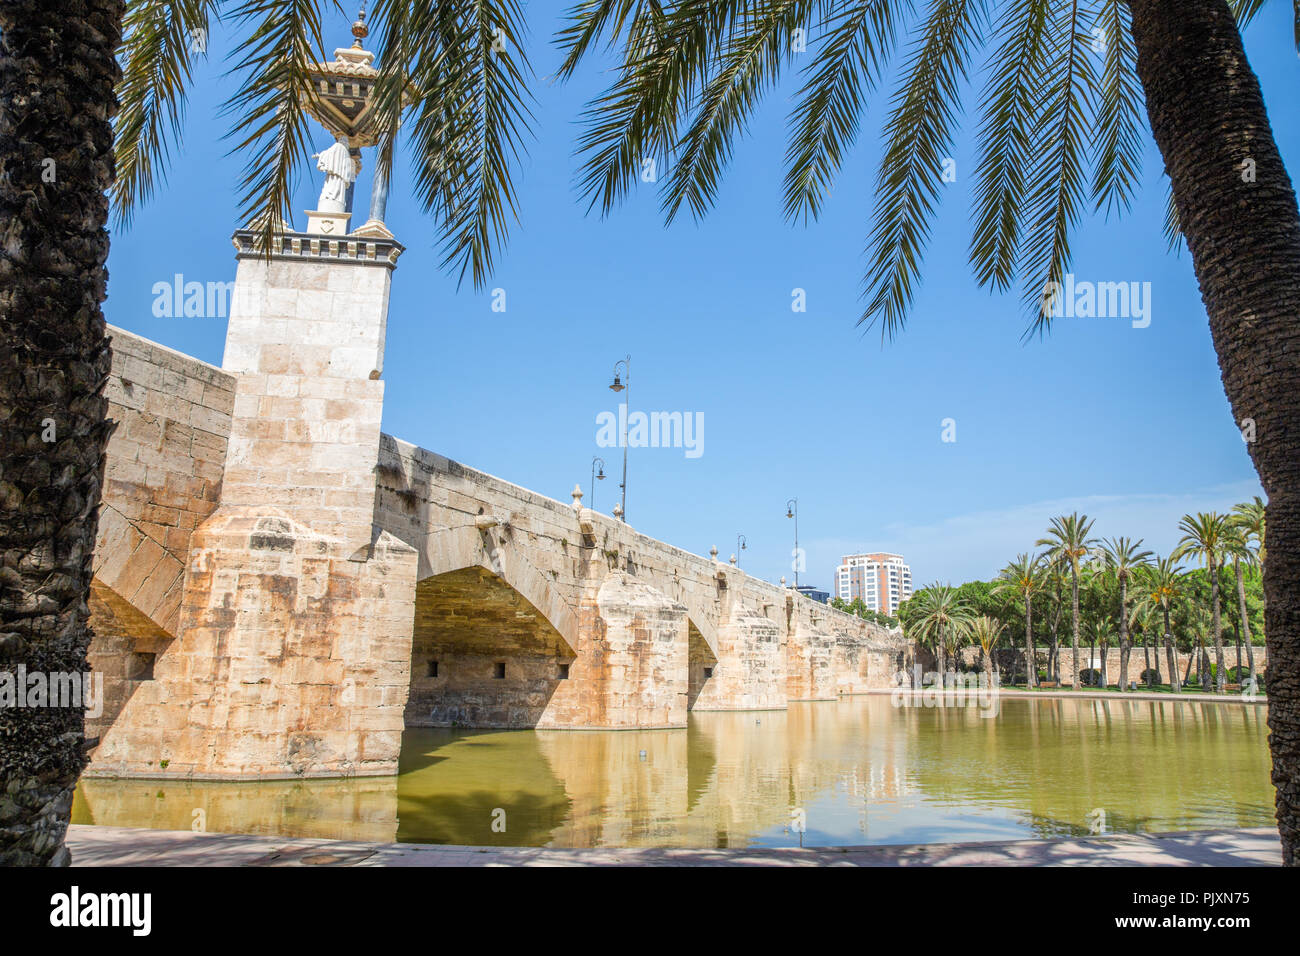 Puente del Mar, one of the five old medieval bridges over the Turia river in Valencia, Spain. The river bed is now landscaped gardens and ponds. Stock Photo